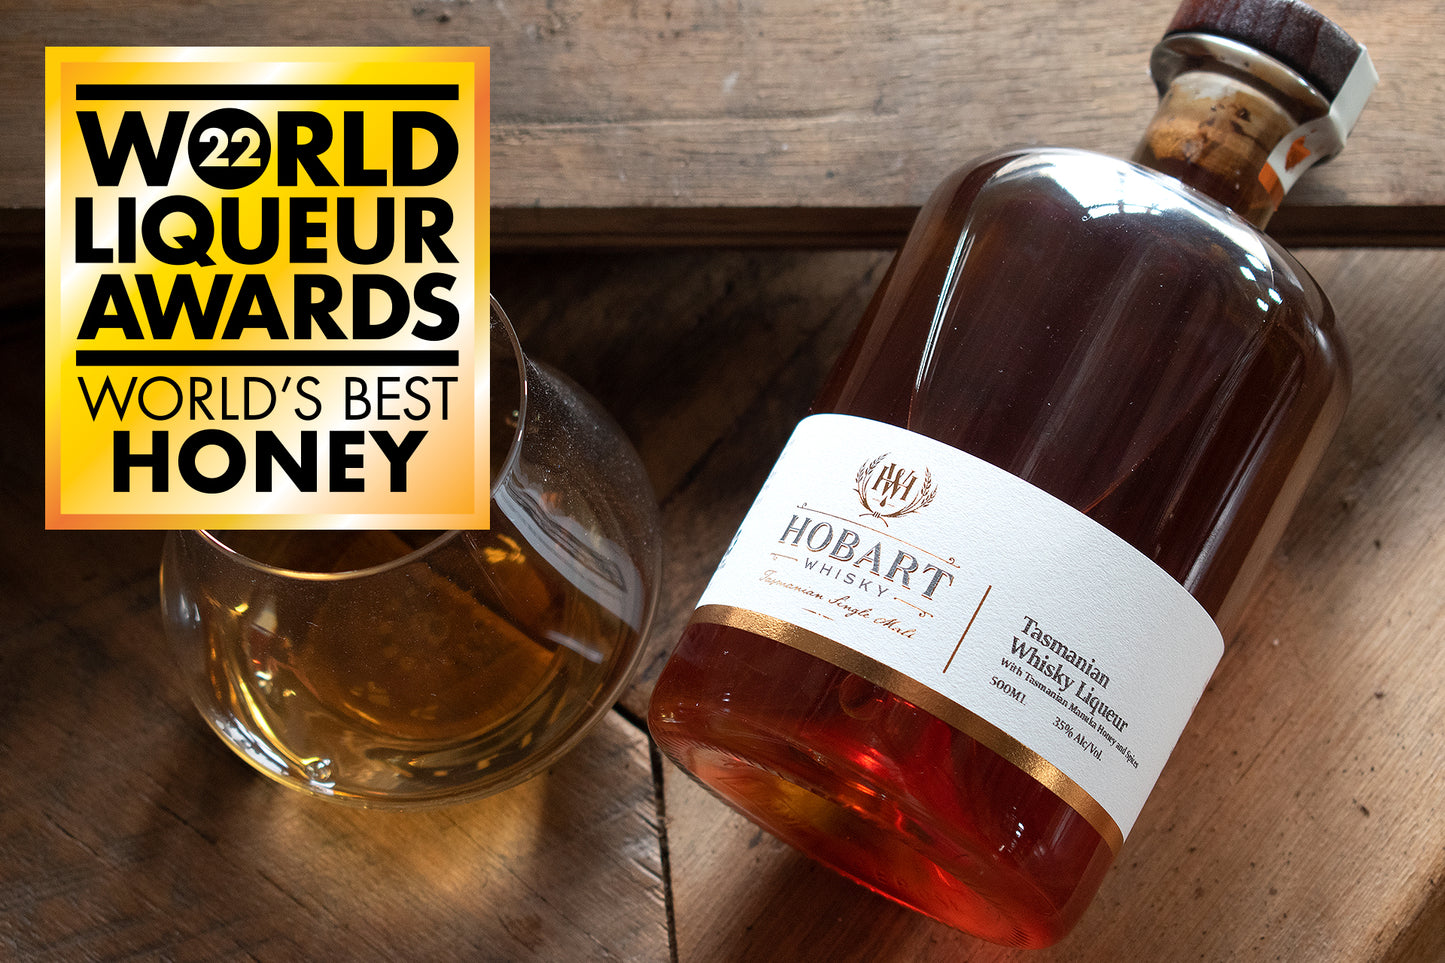 Results from the 2022 World Liqueur Awards!